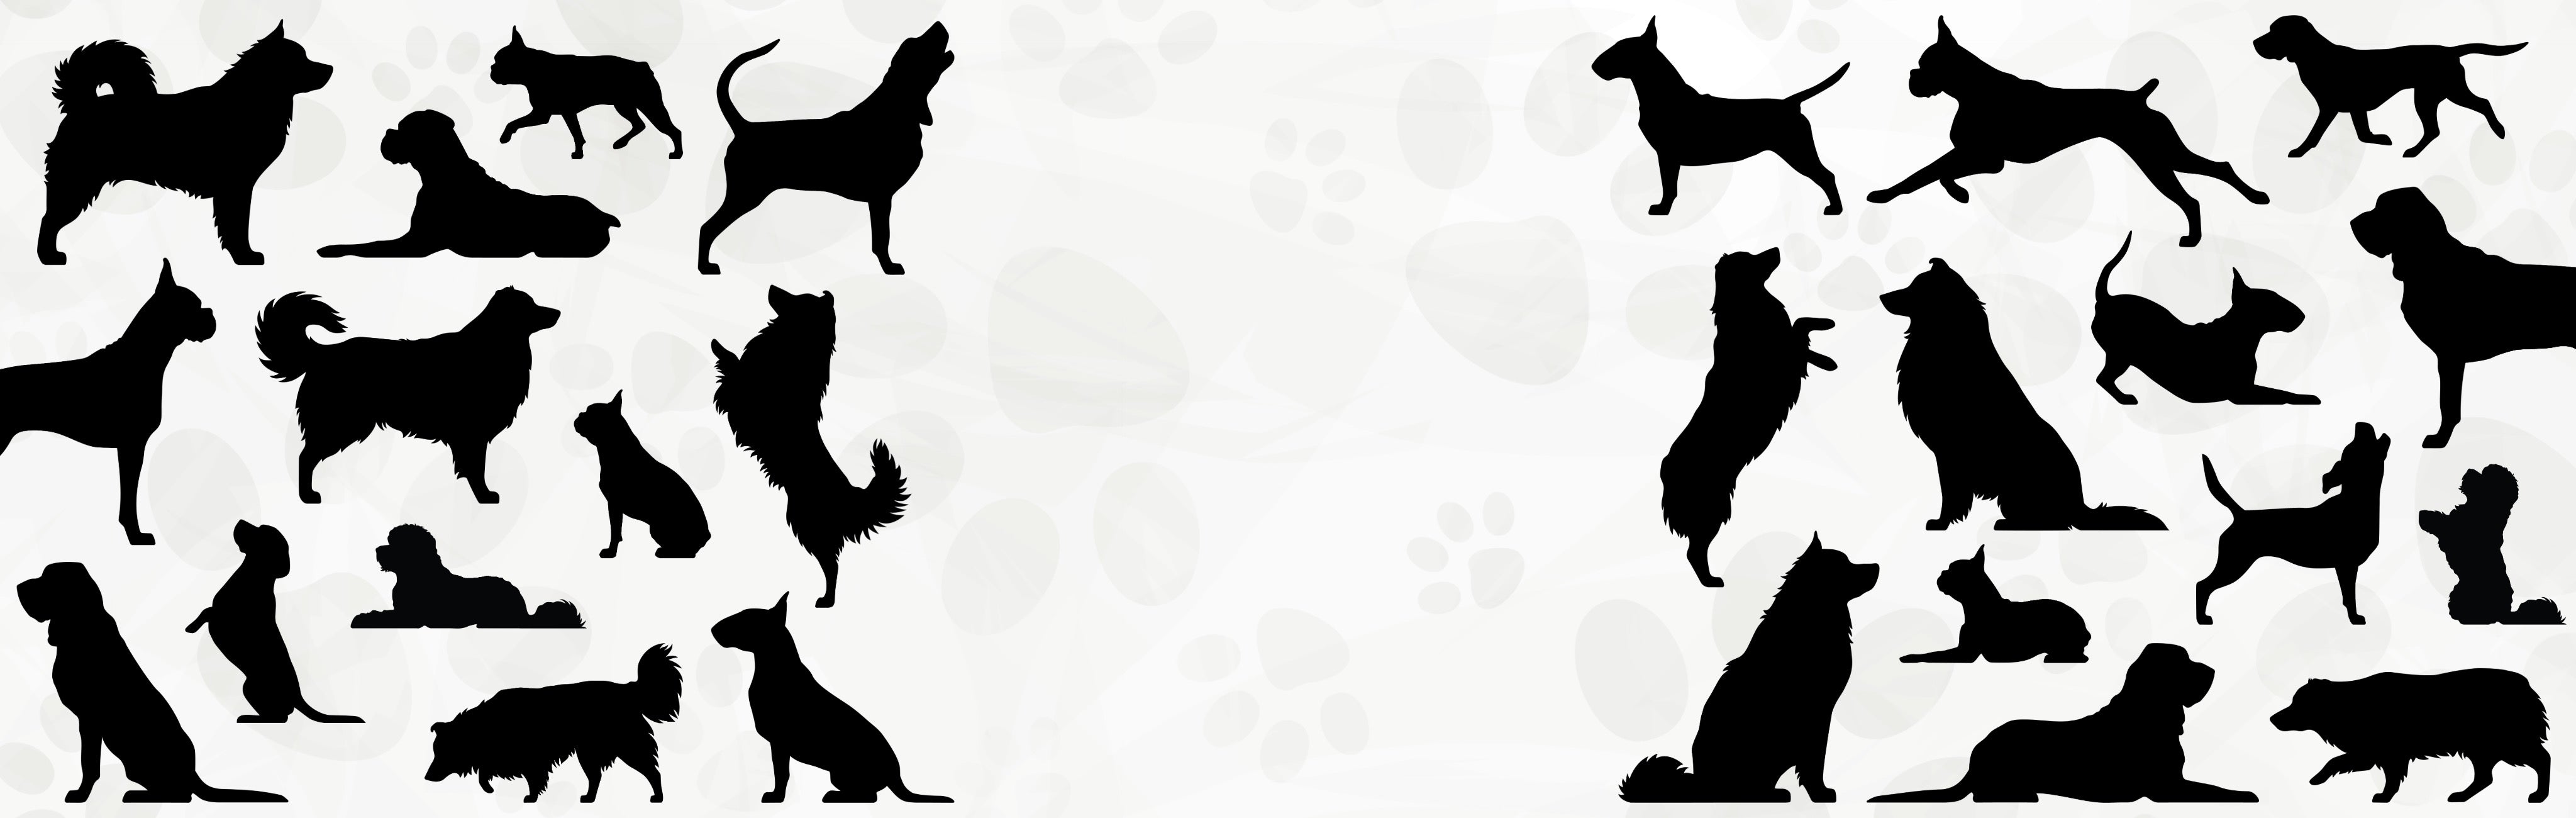 Side profile silhouettes of various dog breeds